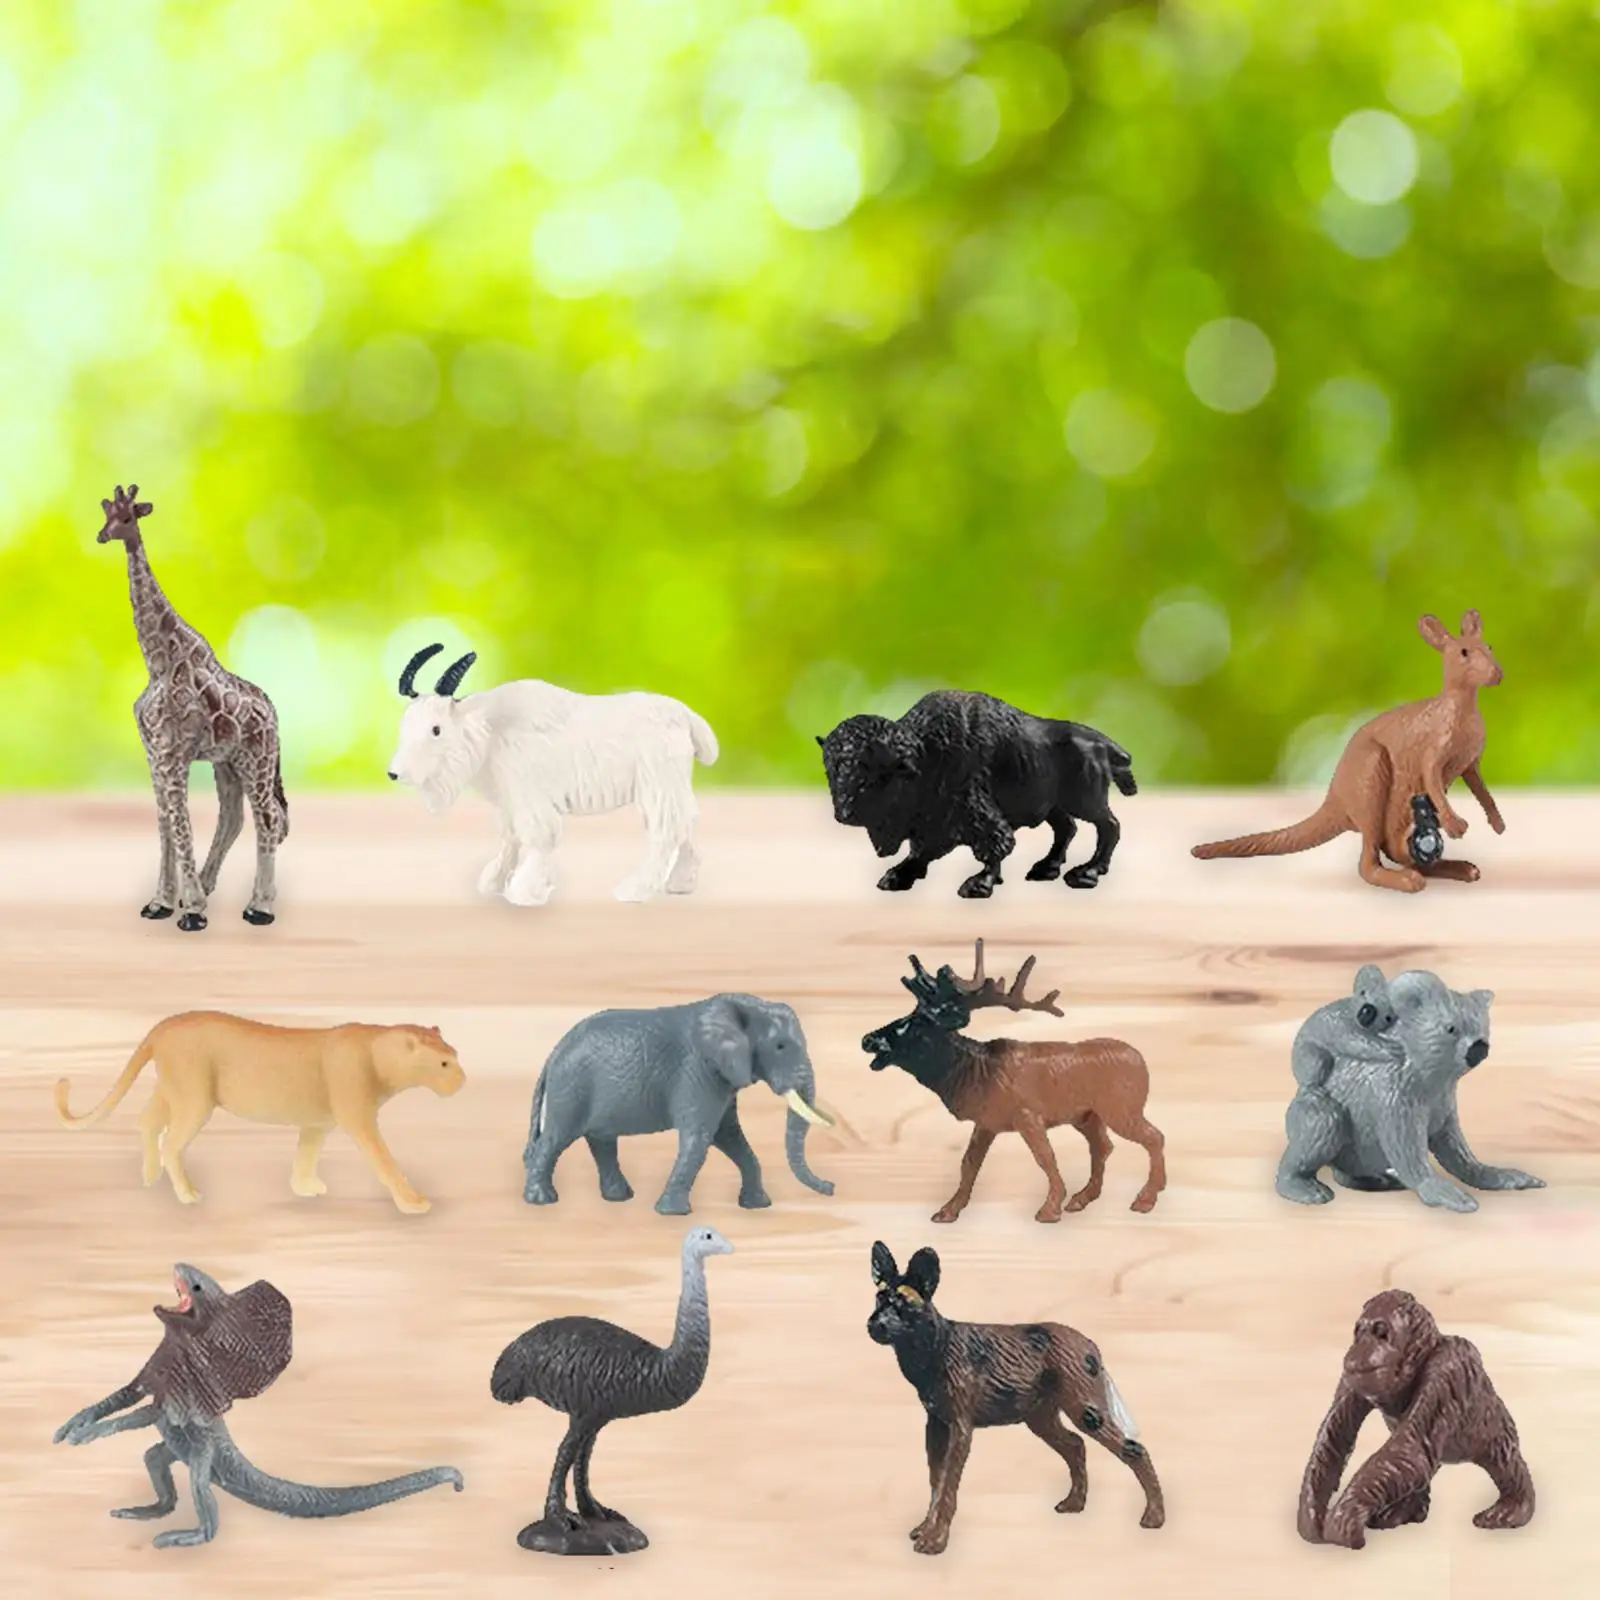 12x Solid Plastic Wildlife Animal Playset for Kids Birthday Gift Collection